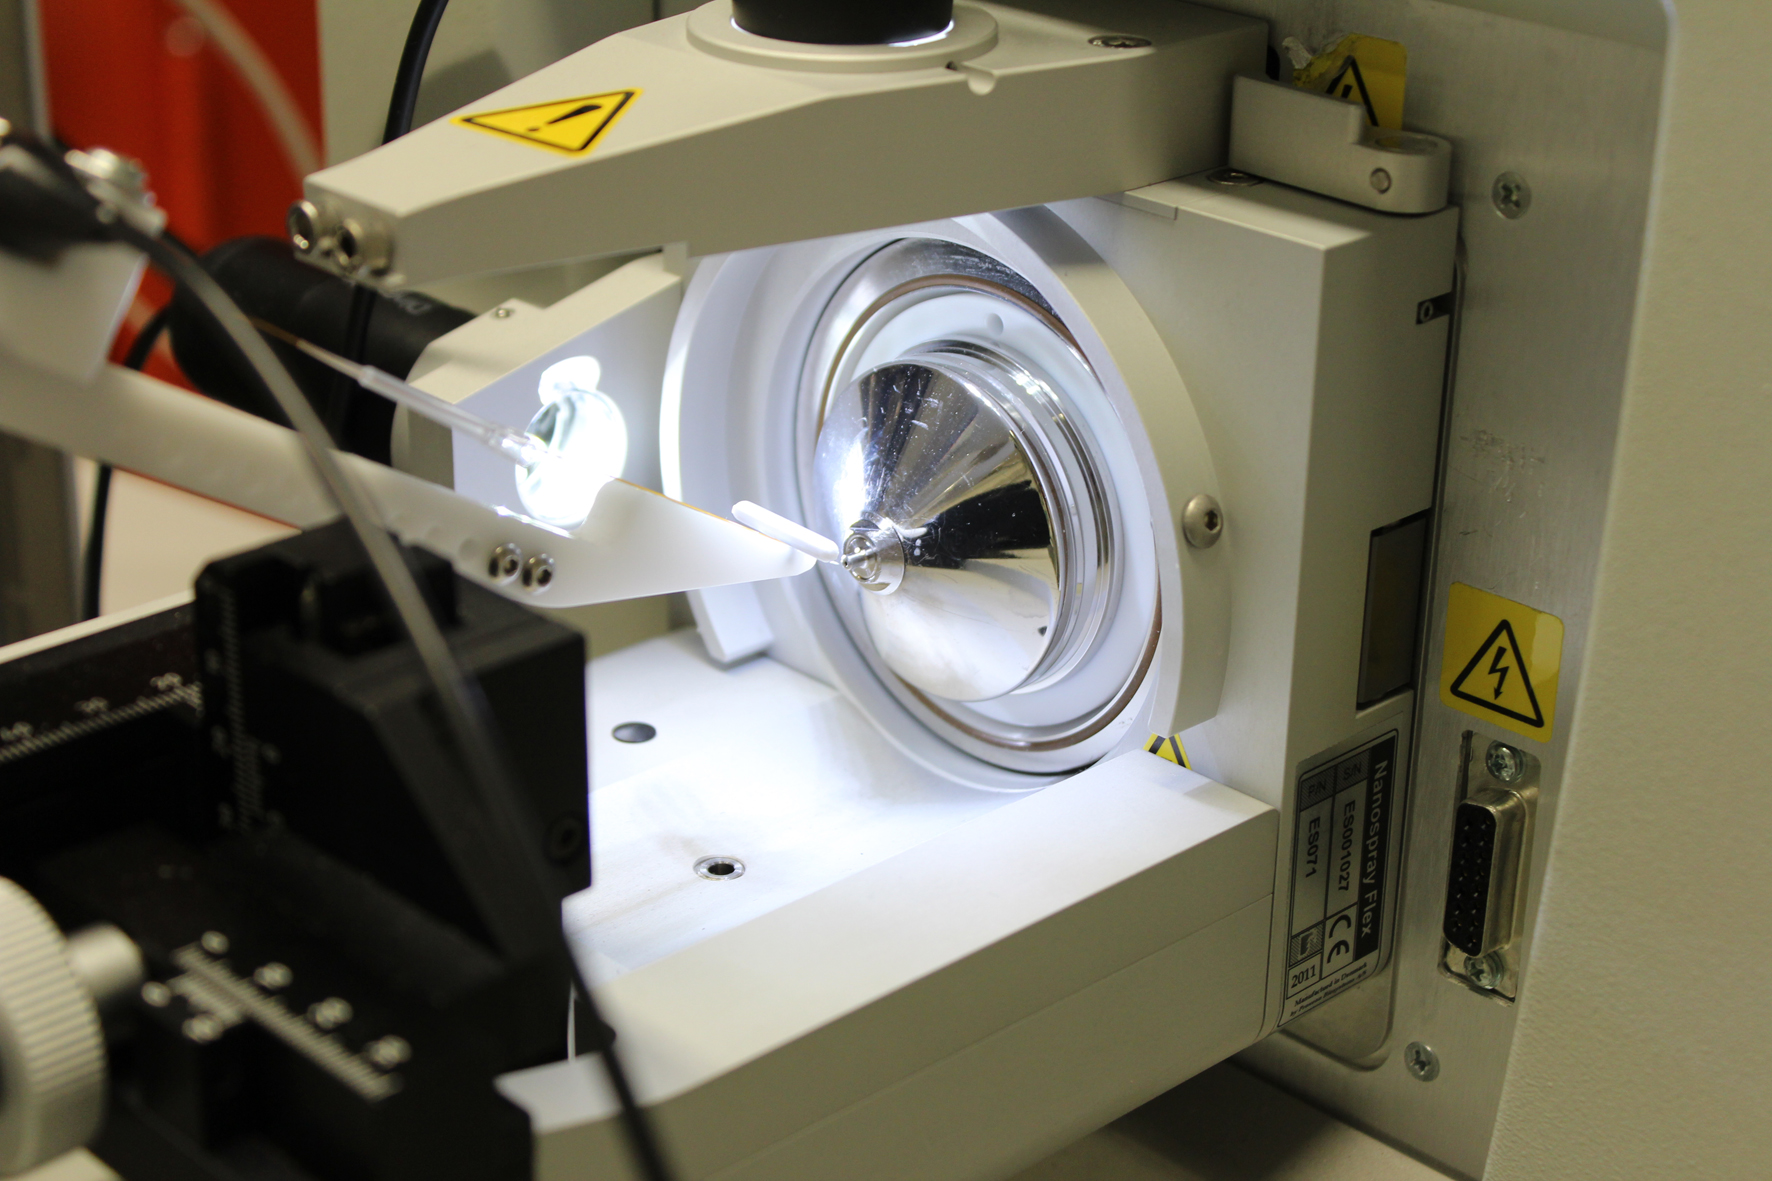 The photo shows the ion source of a mass spectrometer.